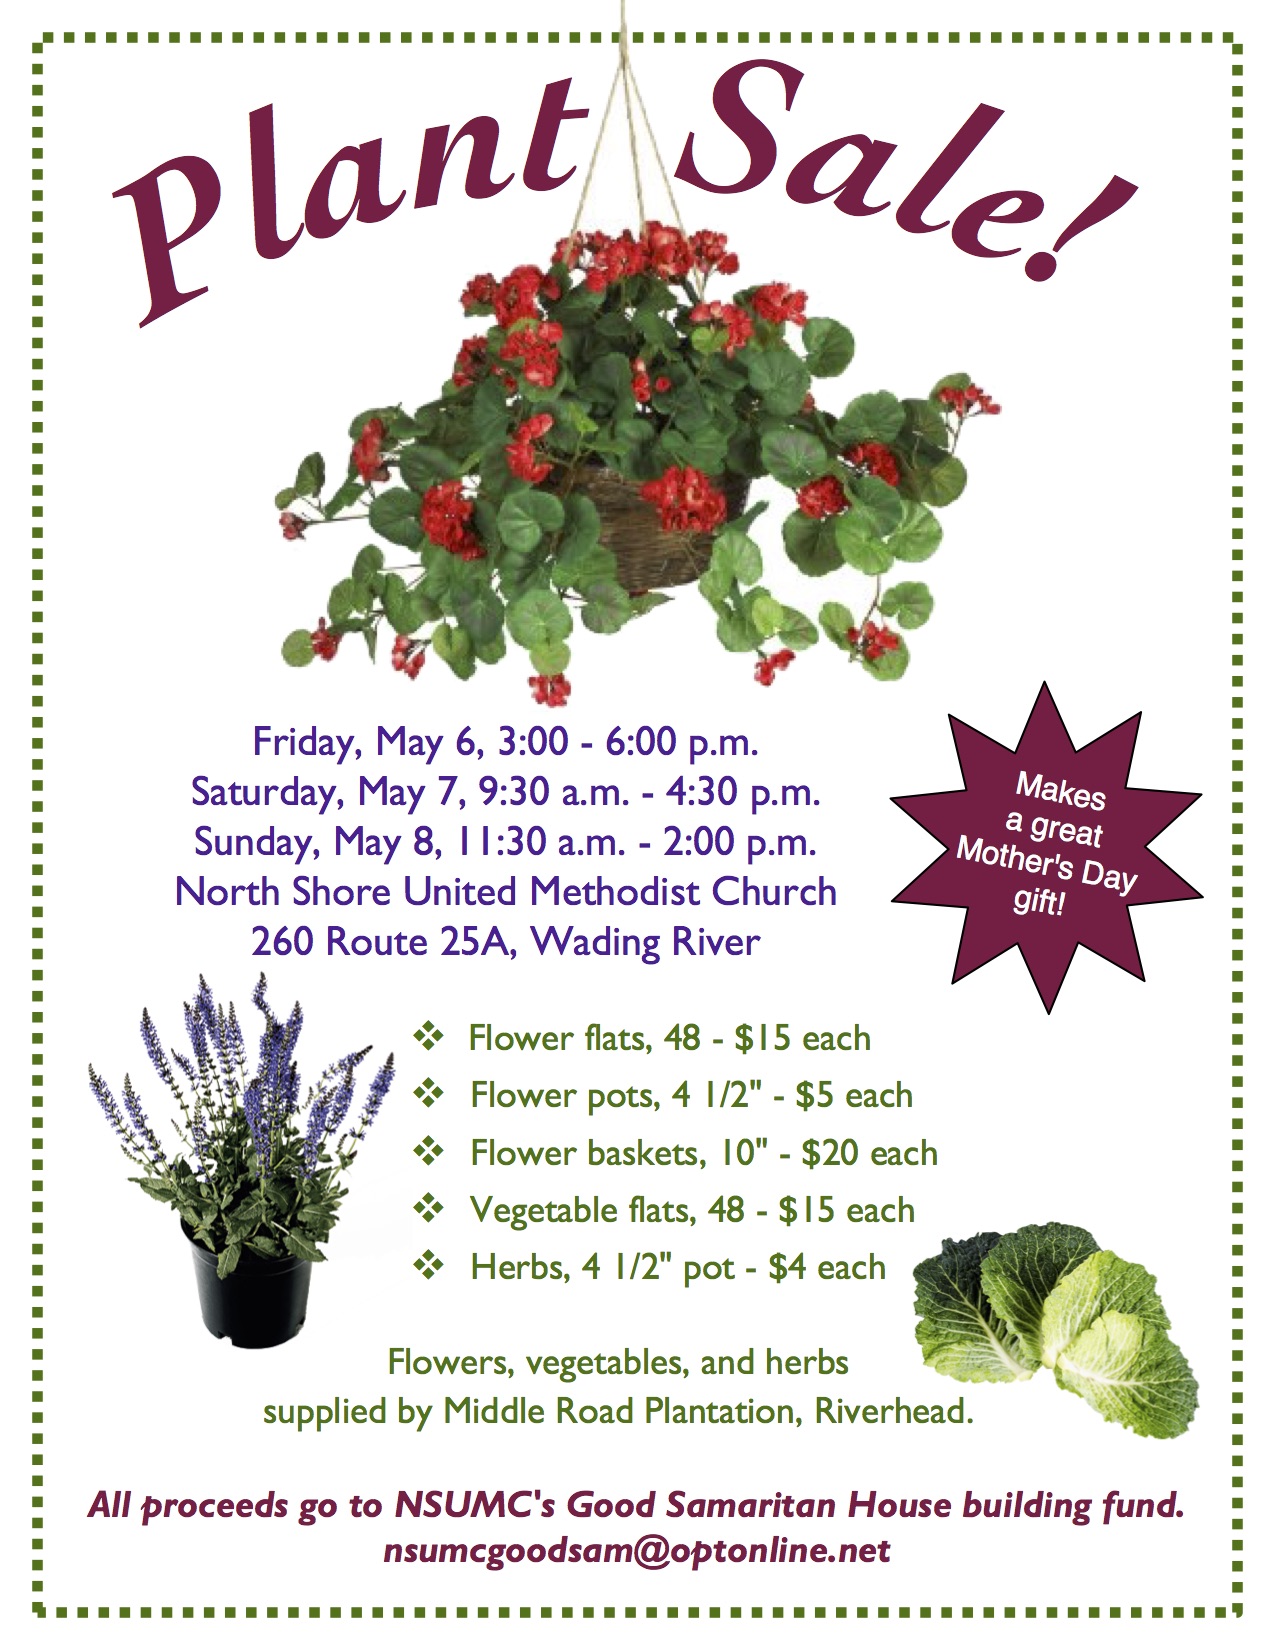 plant mothers flyer mother flower flats annual pots baskets vegetable herbs pick visit great some